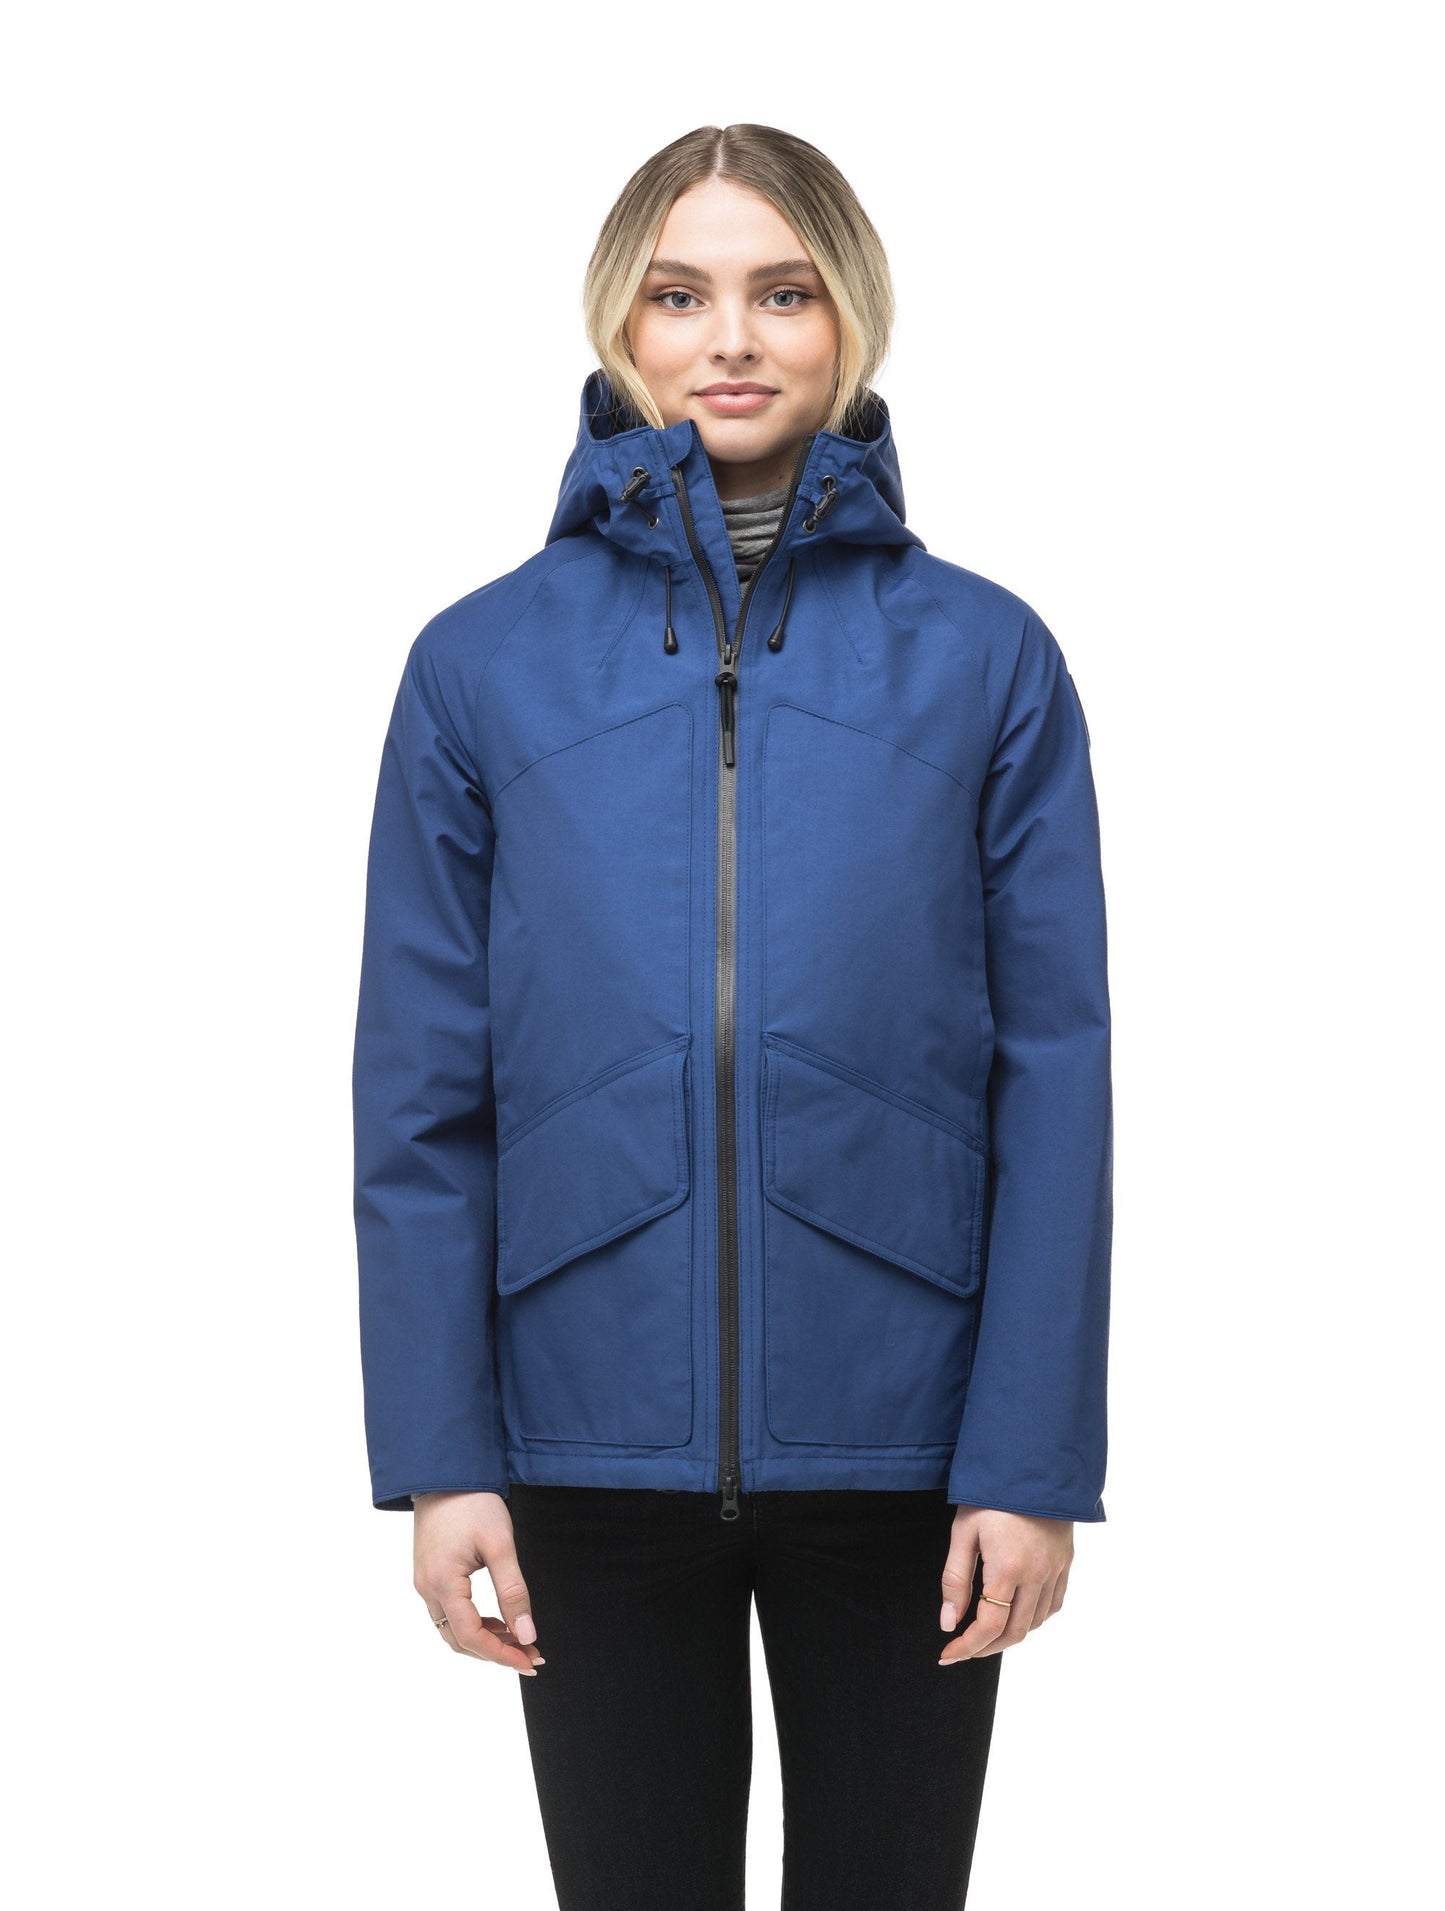 Women's hooded rain jacket with high low hem in Royal